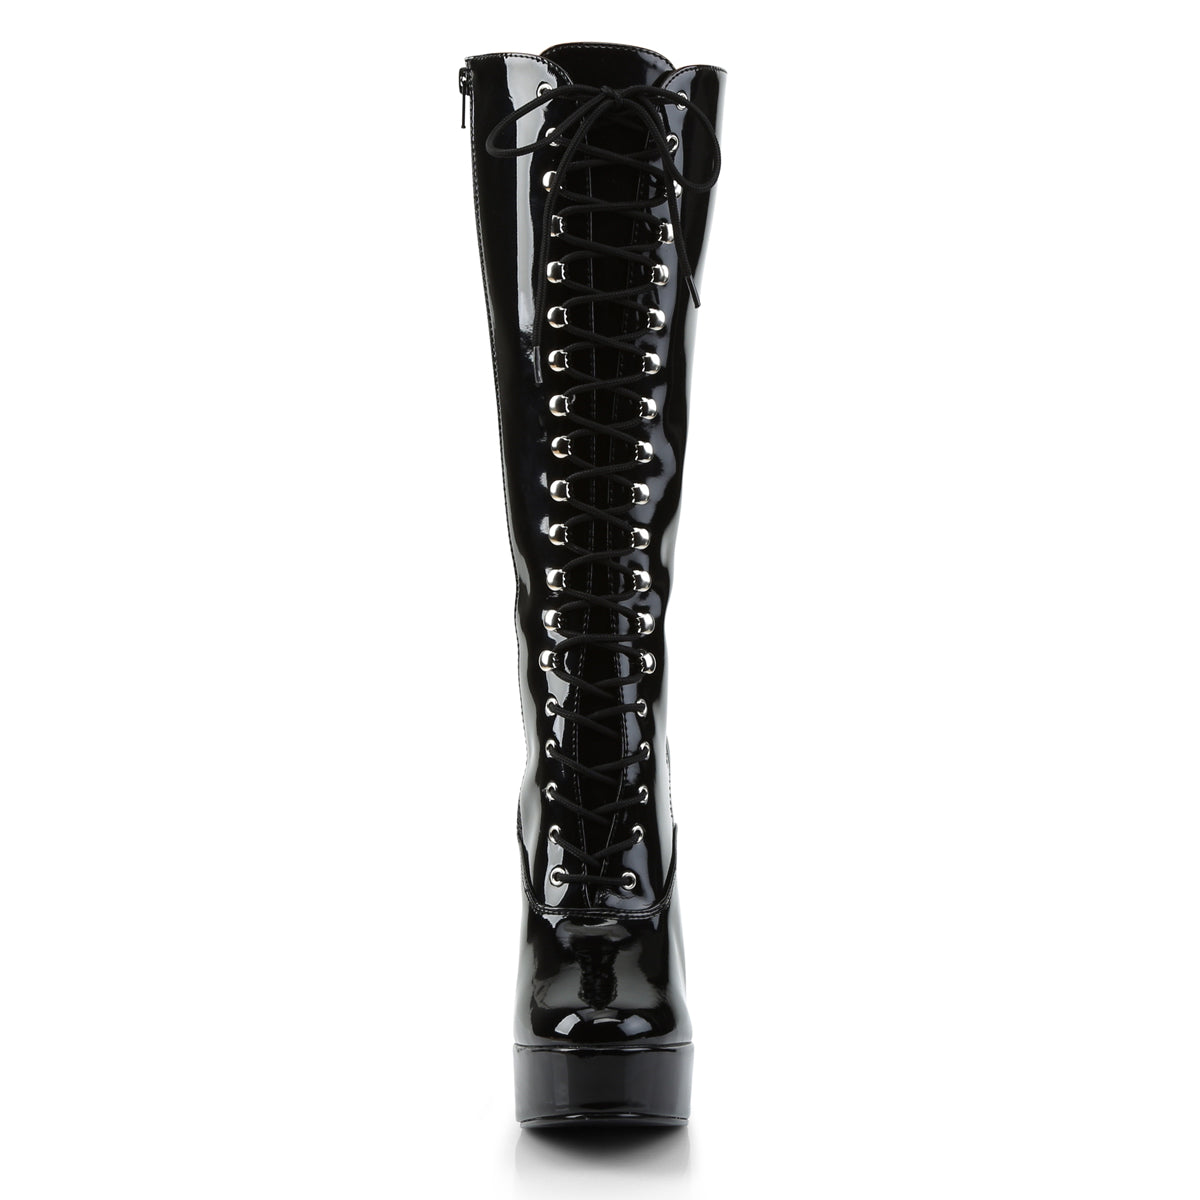 ELECTRA-2020 Knee High Boots